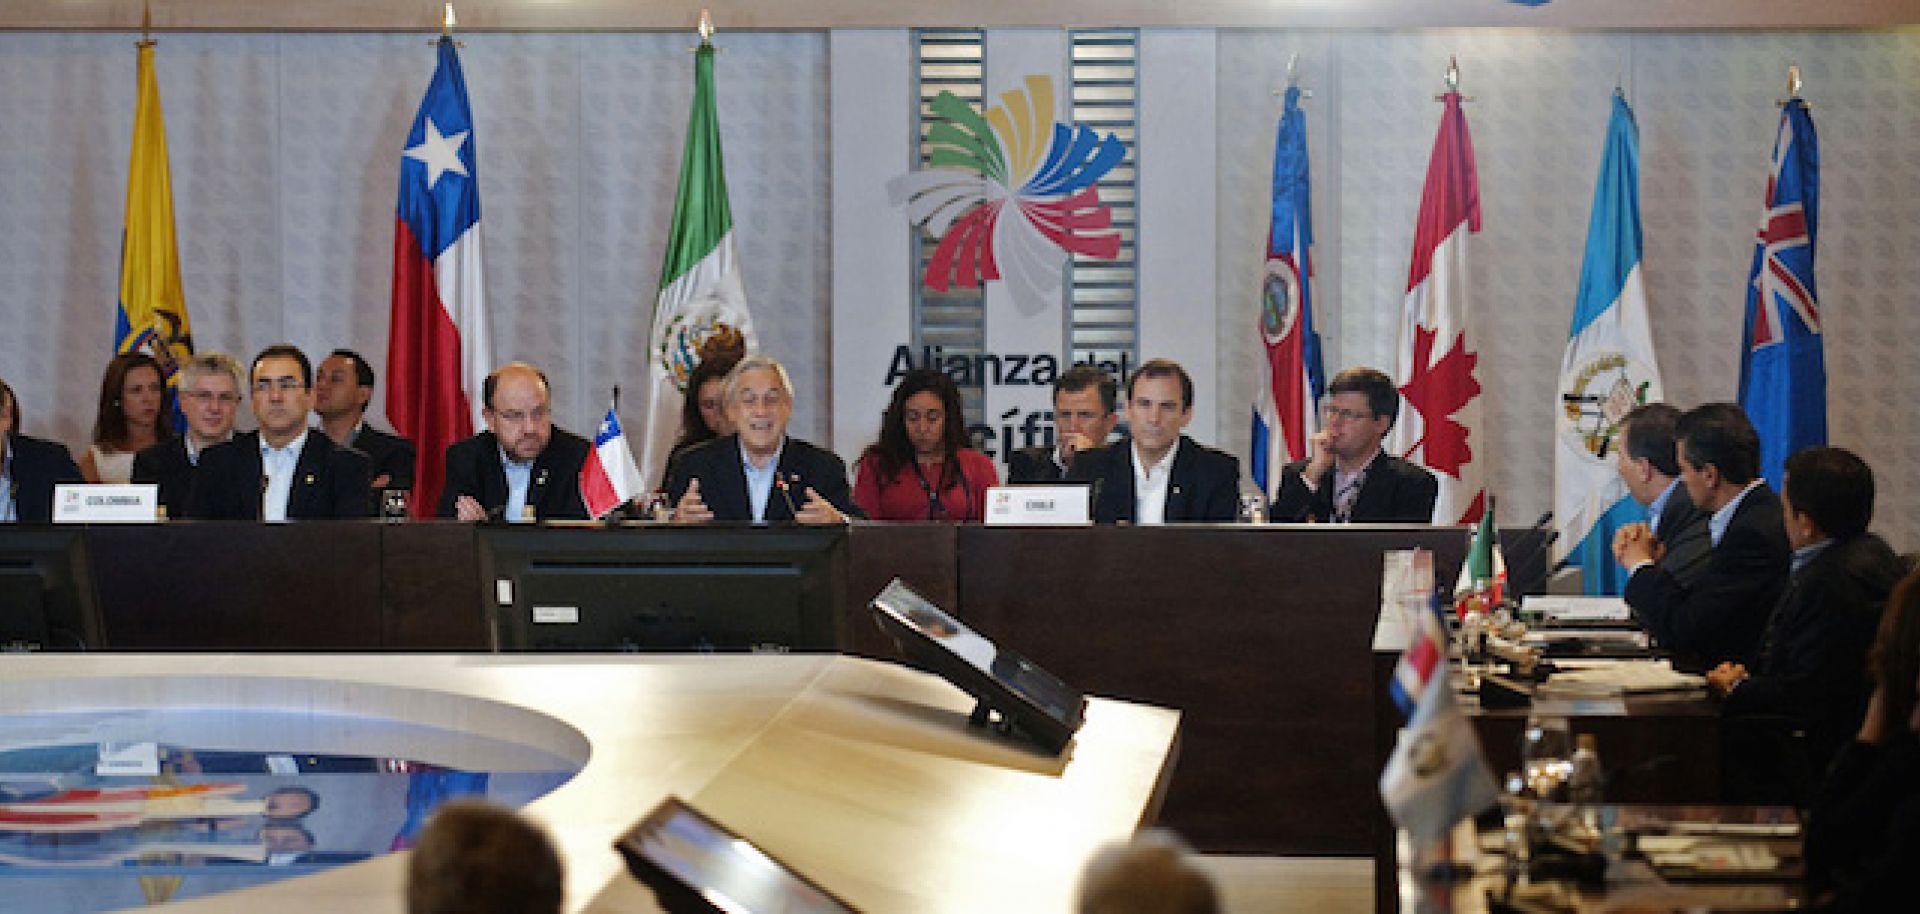 The Pacific Alliance presidential summit in Cali, Colombia, in May 2013.